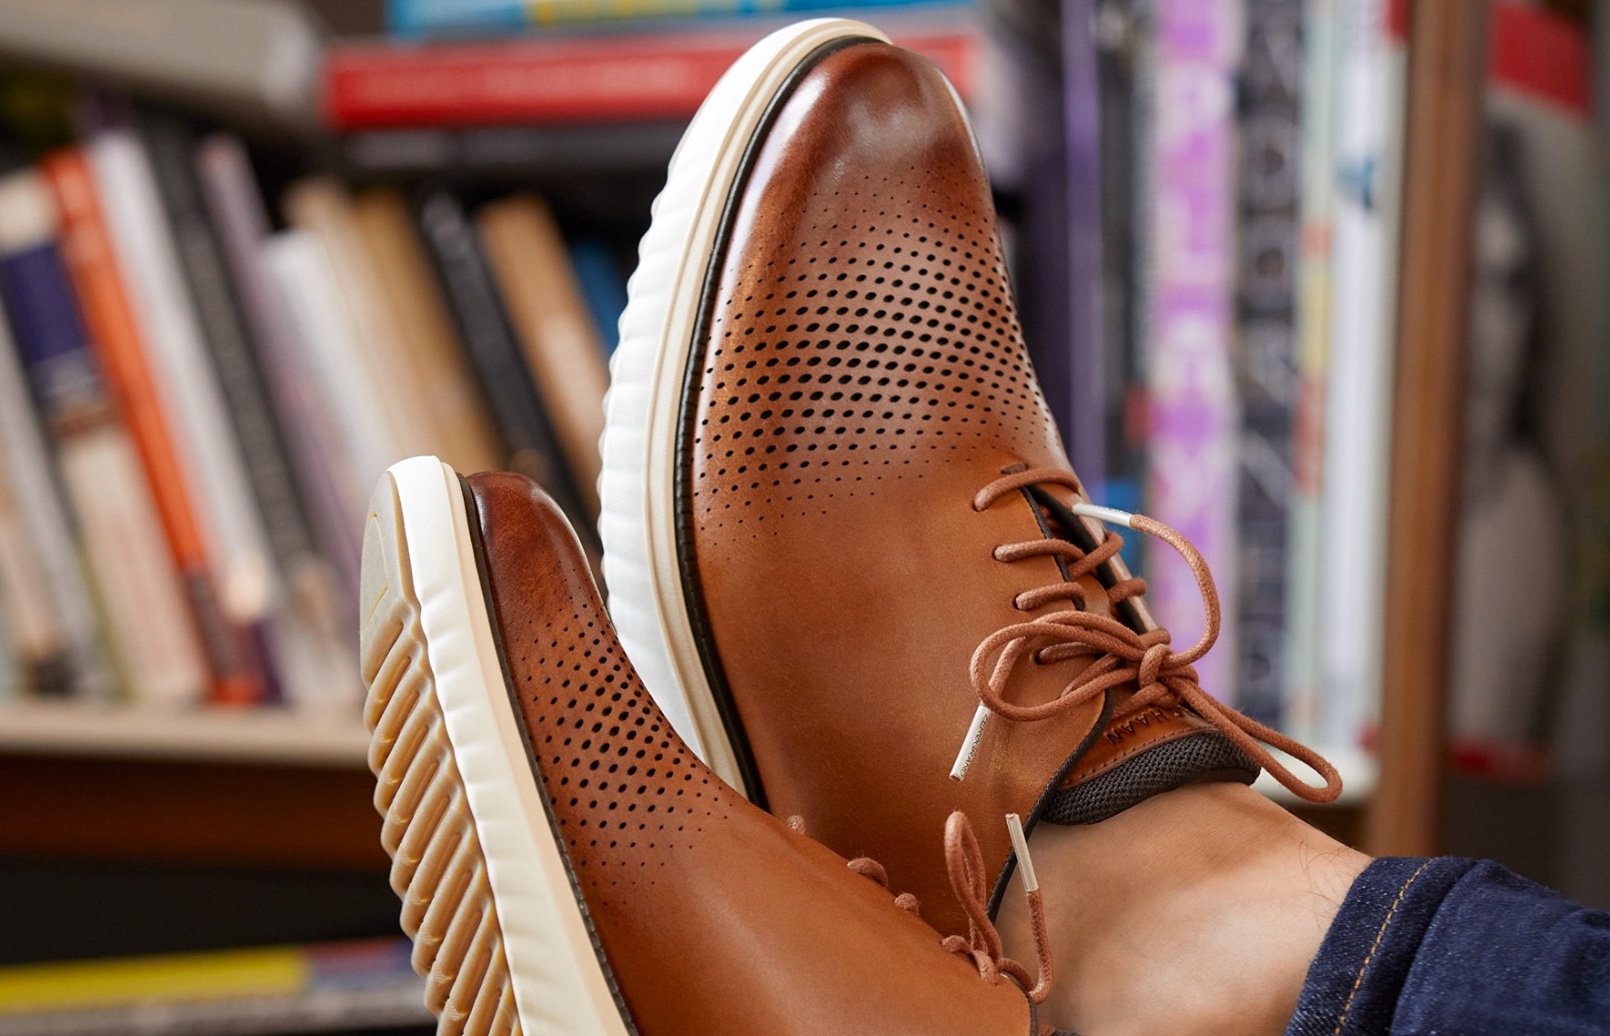 Cole Haan Launches New Performance-Inspired Dress Shoe